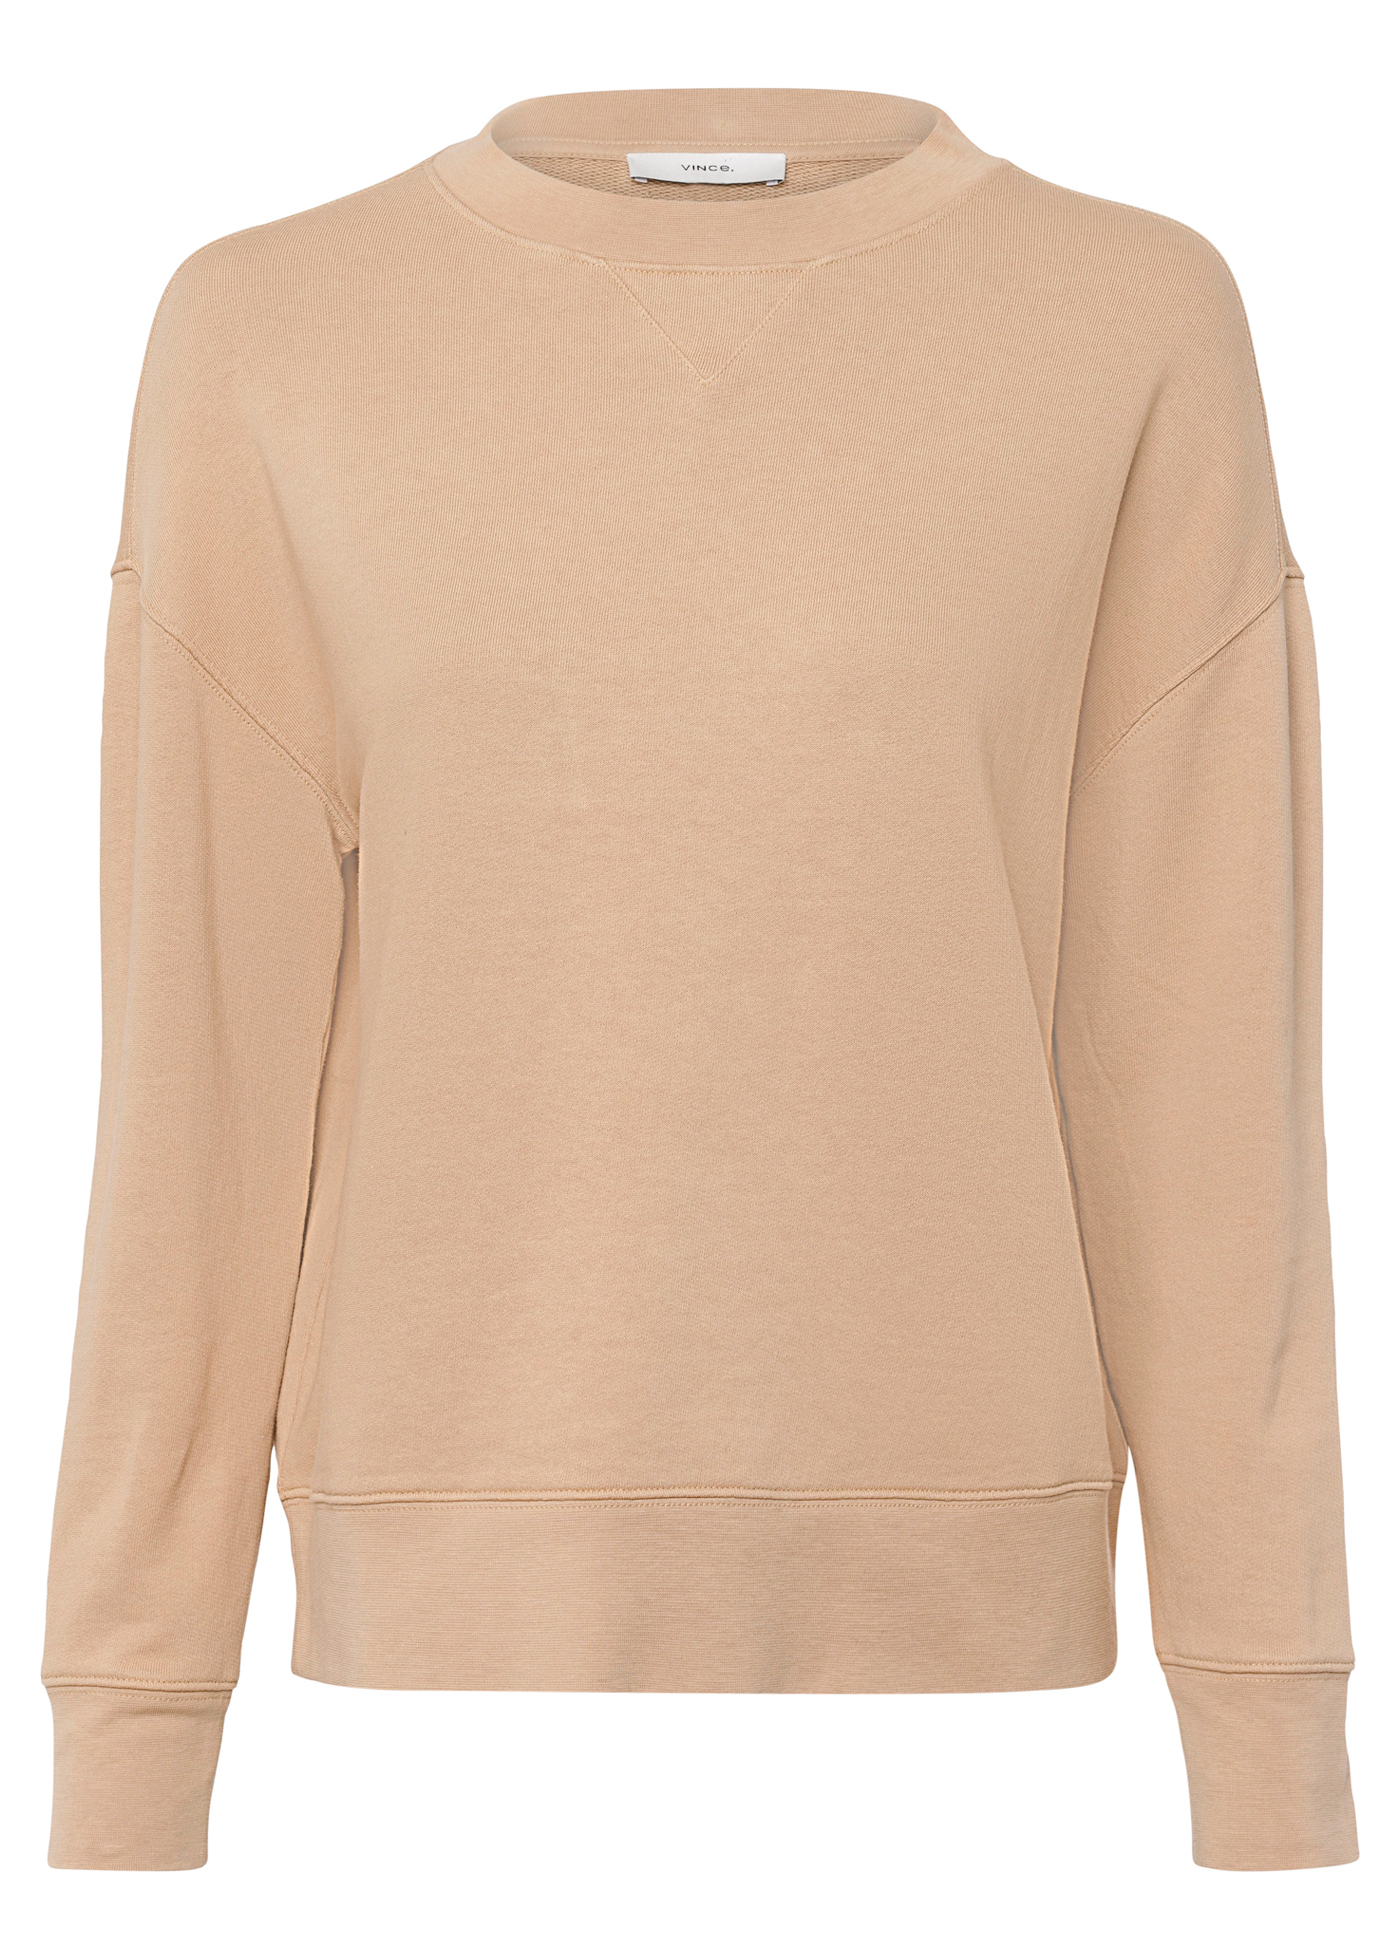 ESSENTIAL RELAXED PULLOVER / ESSENTIAL RELAXED PULLOVER image number 0